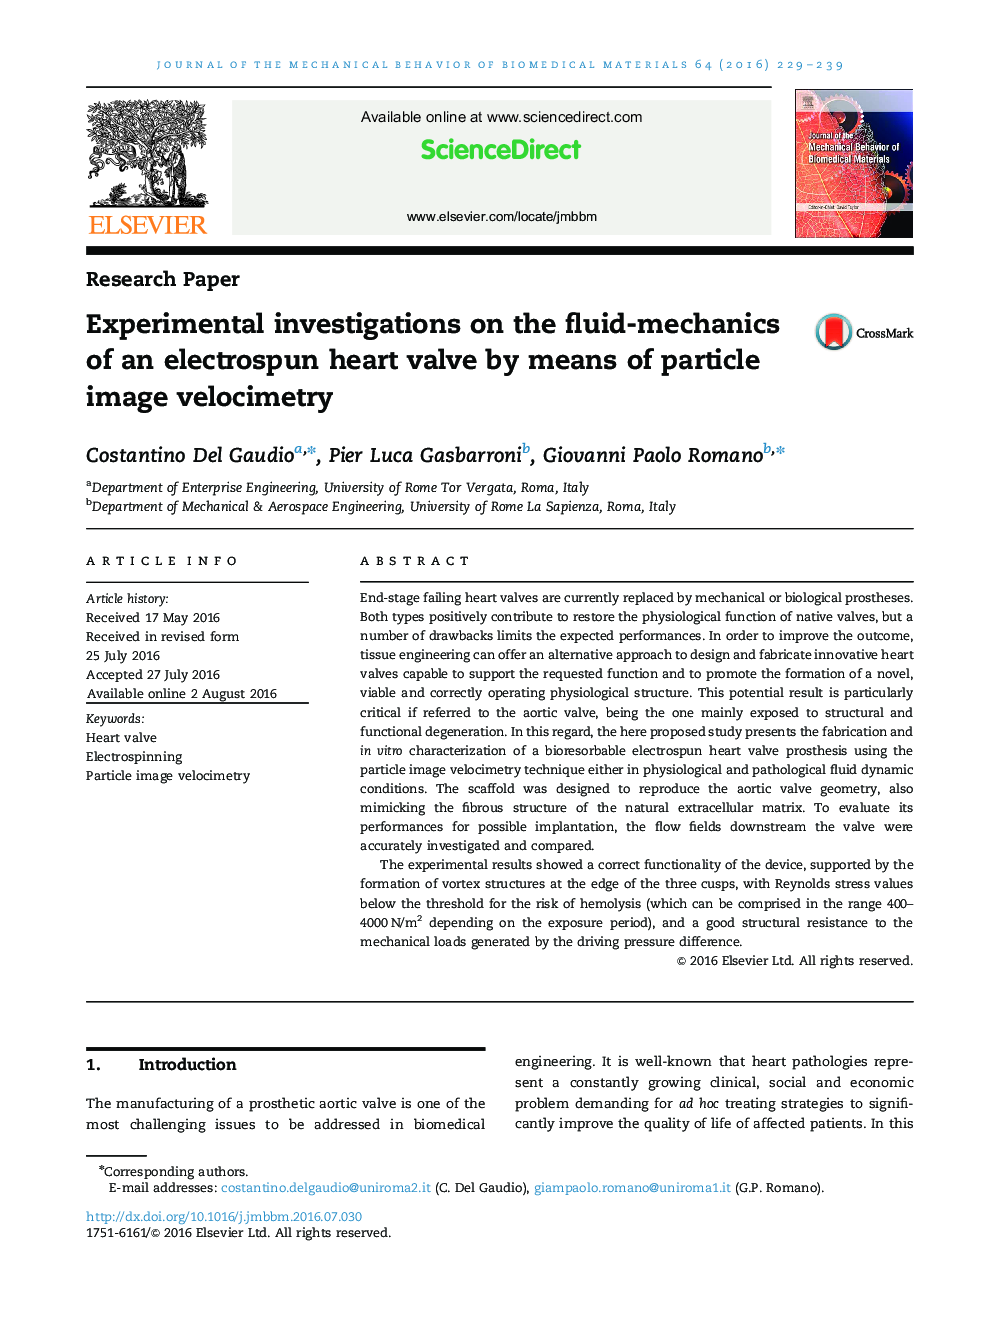 Experimental investigations on the fluid-mechanics of an electrospun heart valve by means of particle image velocimetry